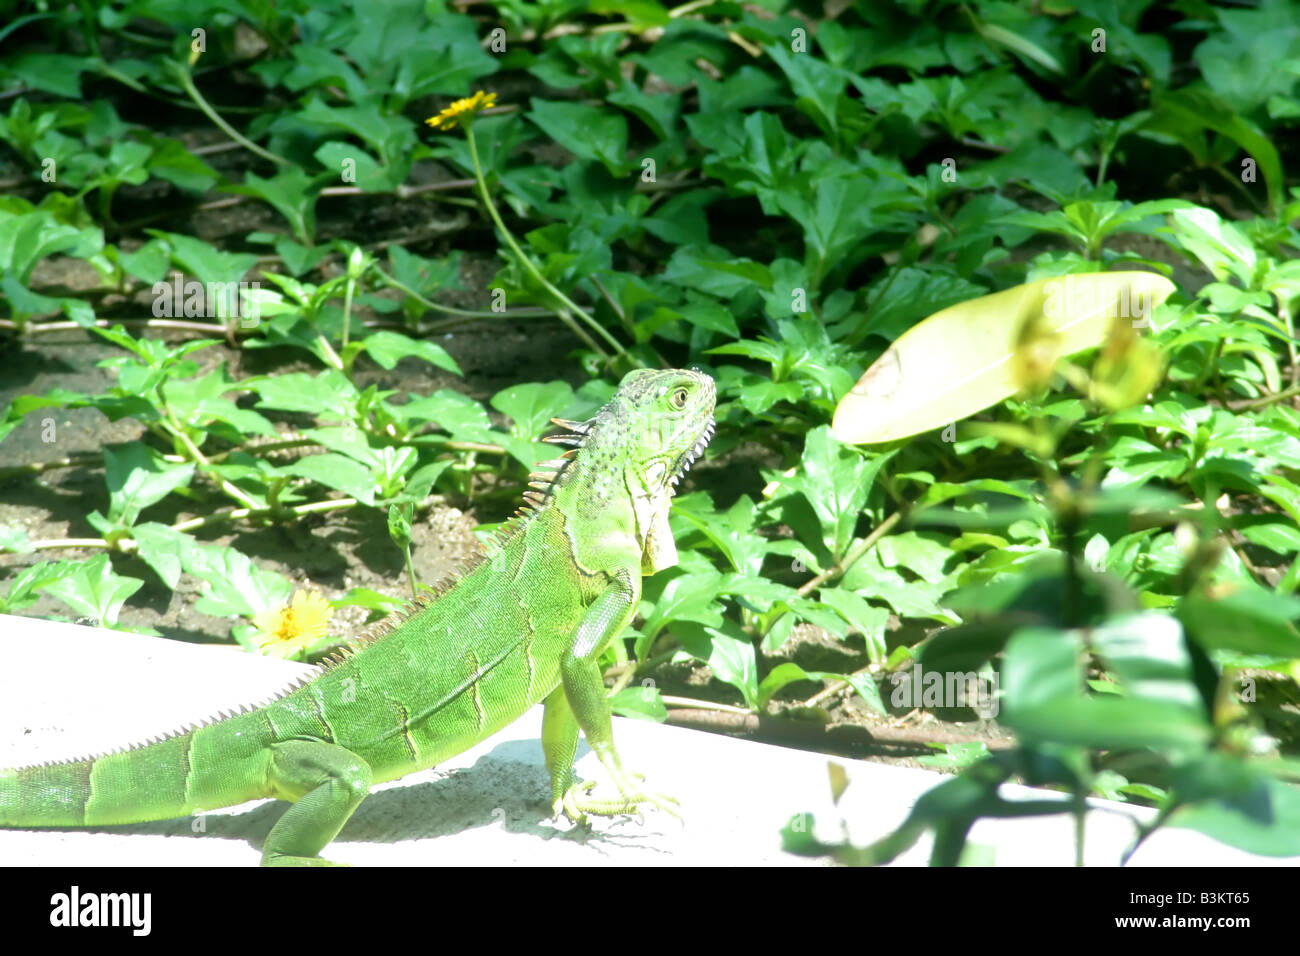 An iguana sunning himself with a lush green background Stock Photo